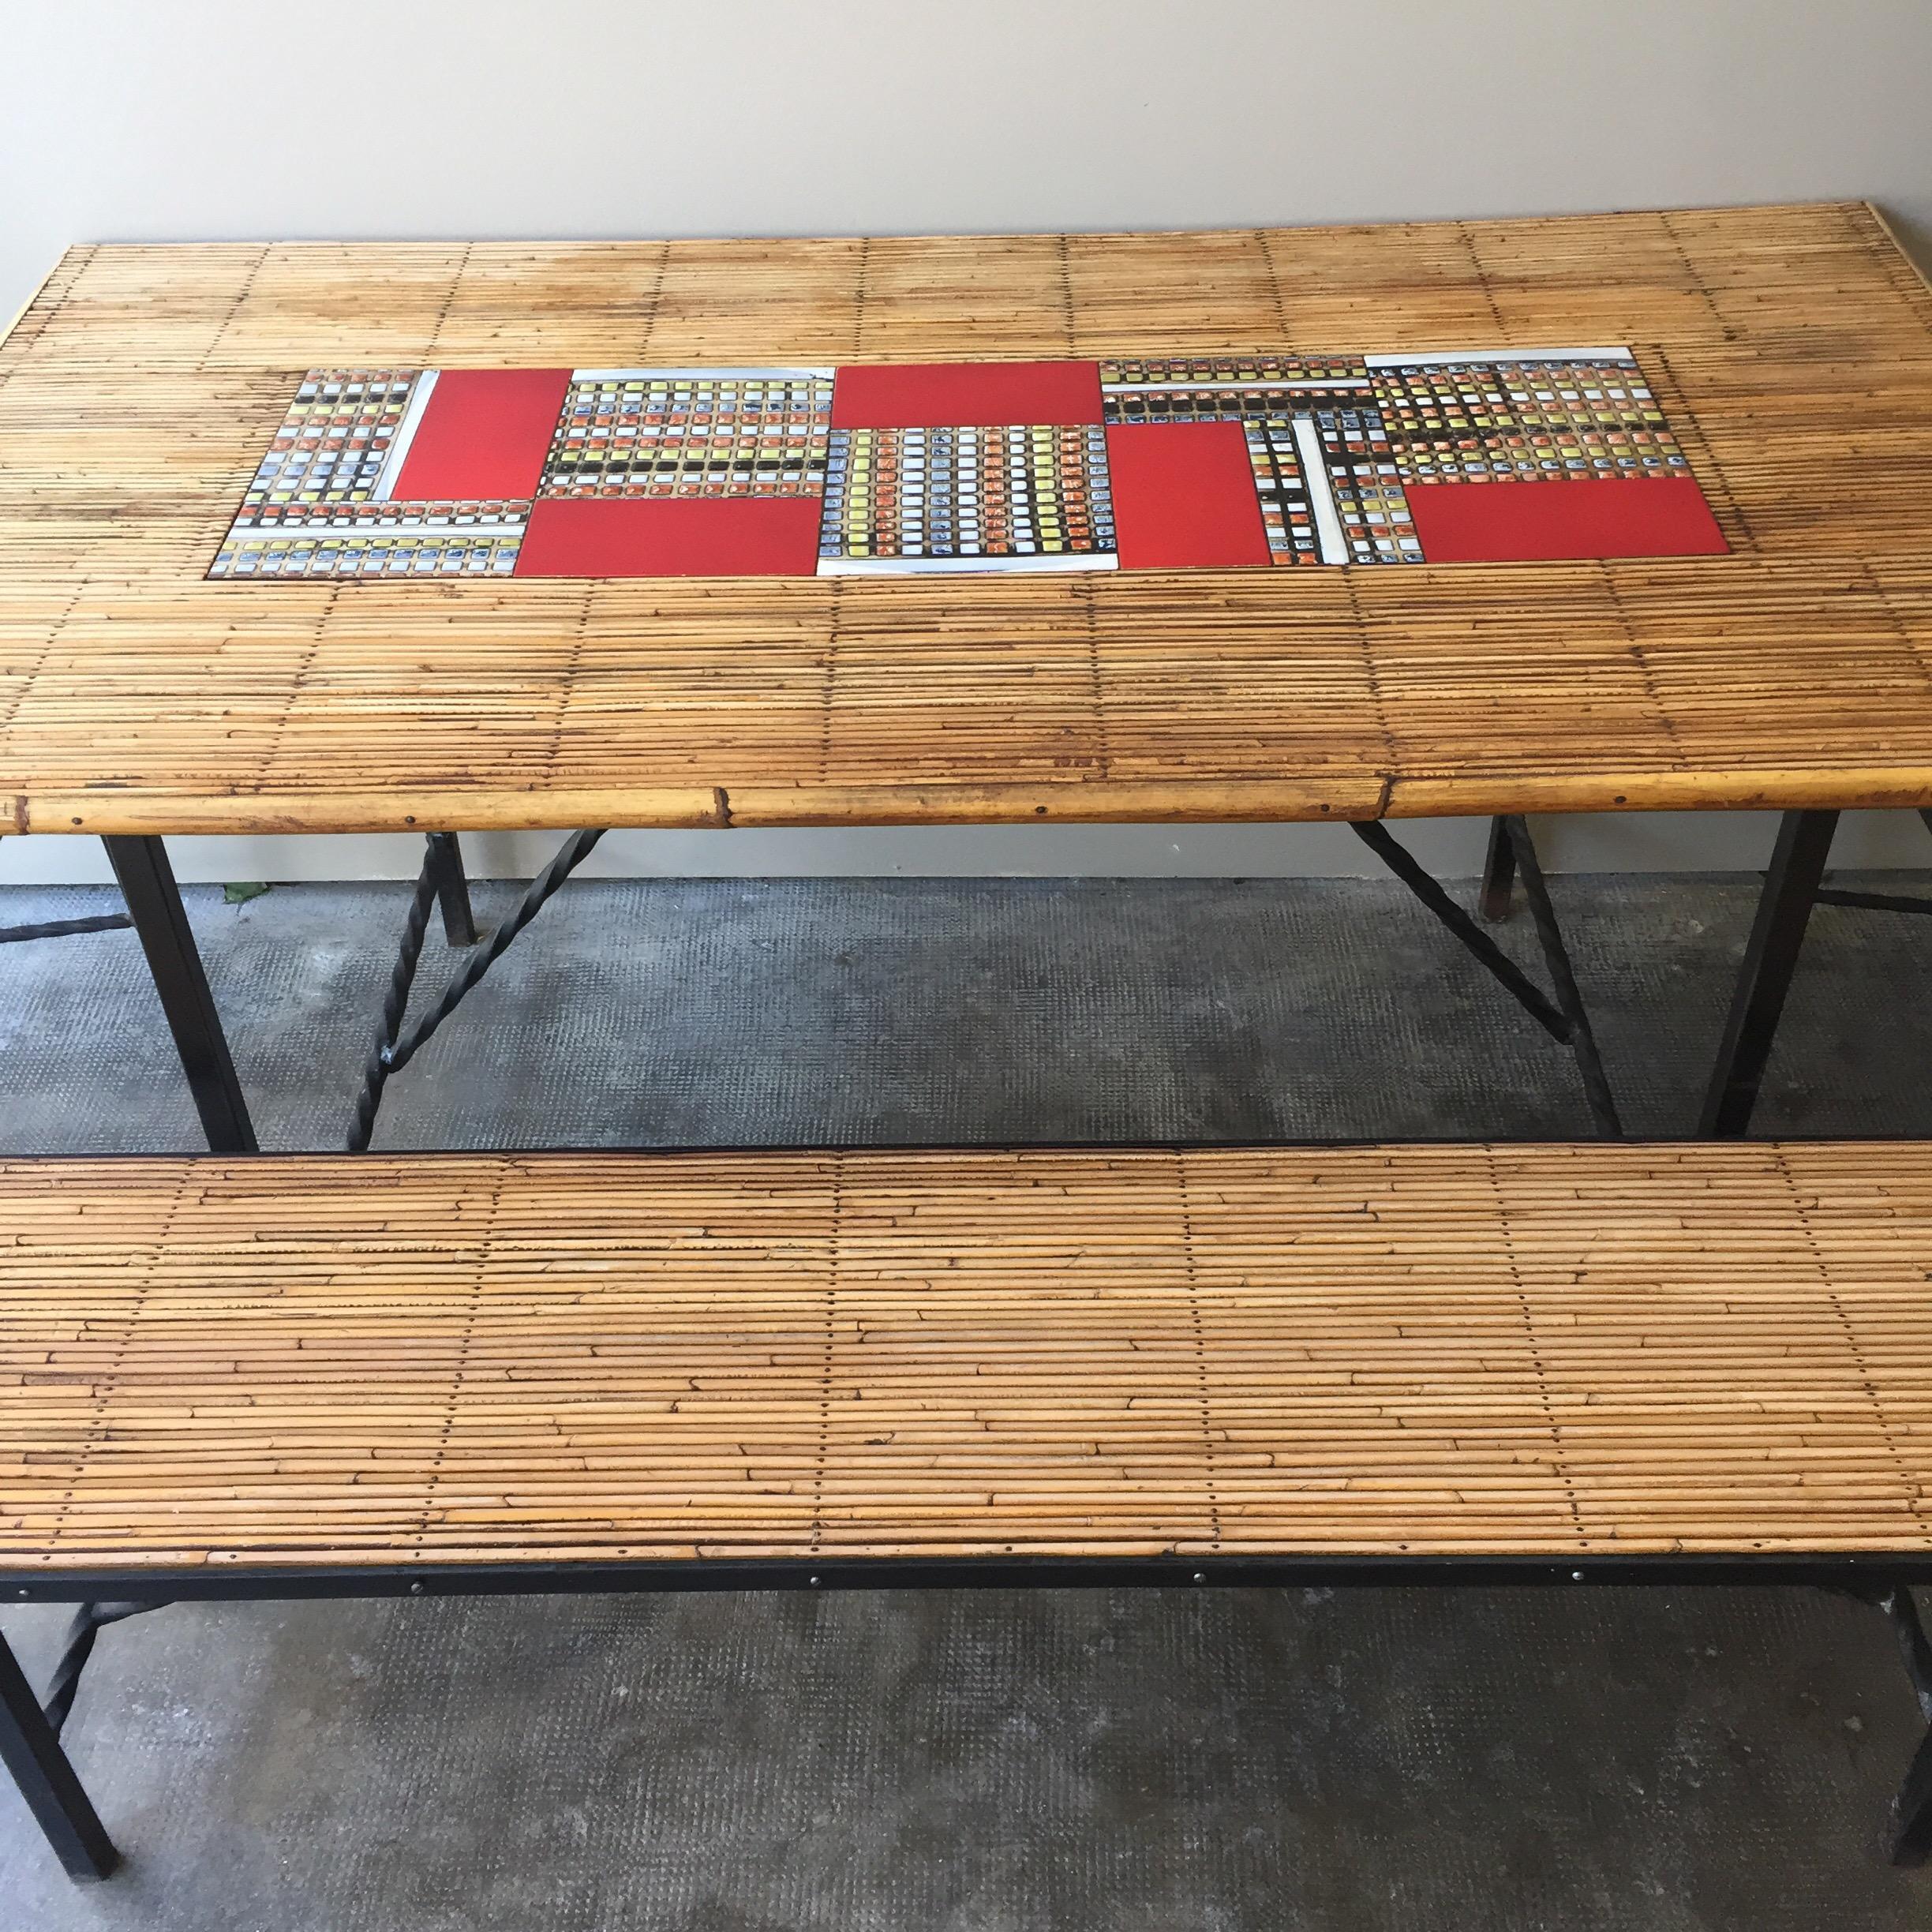 Midcentury, Vallauris bamboo Capron dining table set with 2 chairs and 1 bench.
Coming from a Vallauris workshop. (South of France)
Made of bamboo, patinated iron and ceramic tiles from Roger Capron at the center of the table.
12 tiles.
The seat